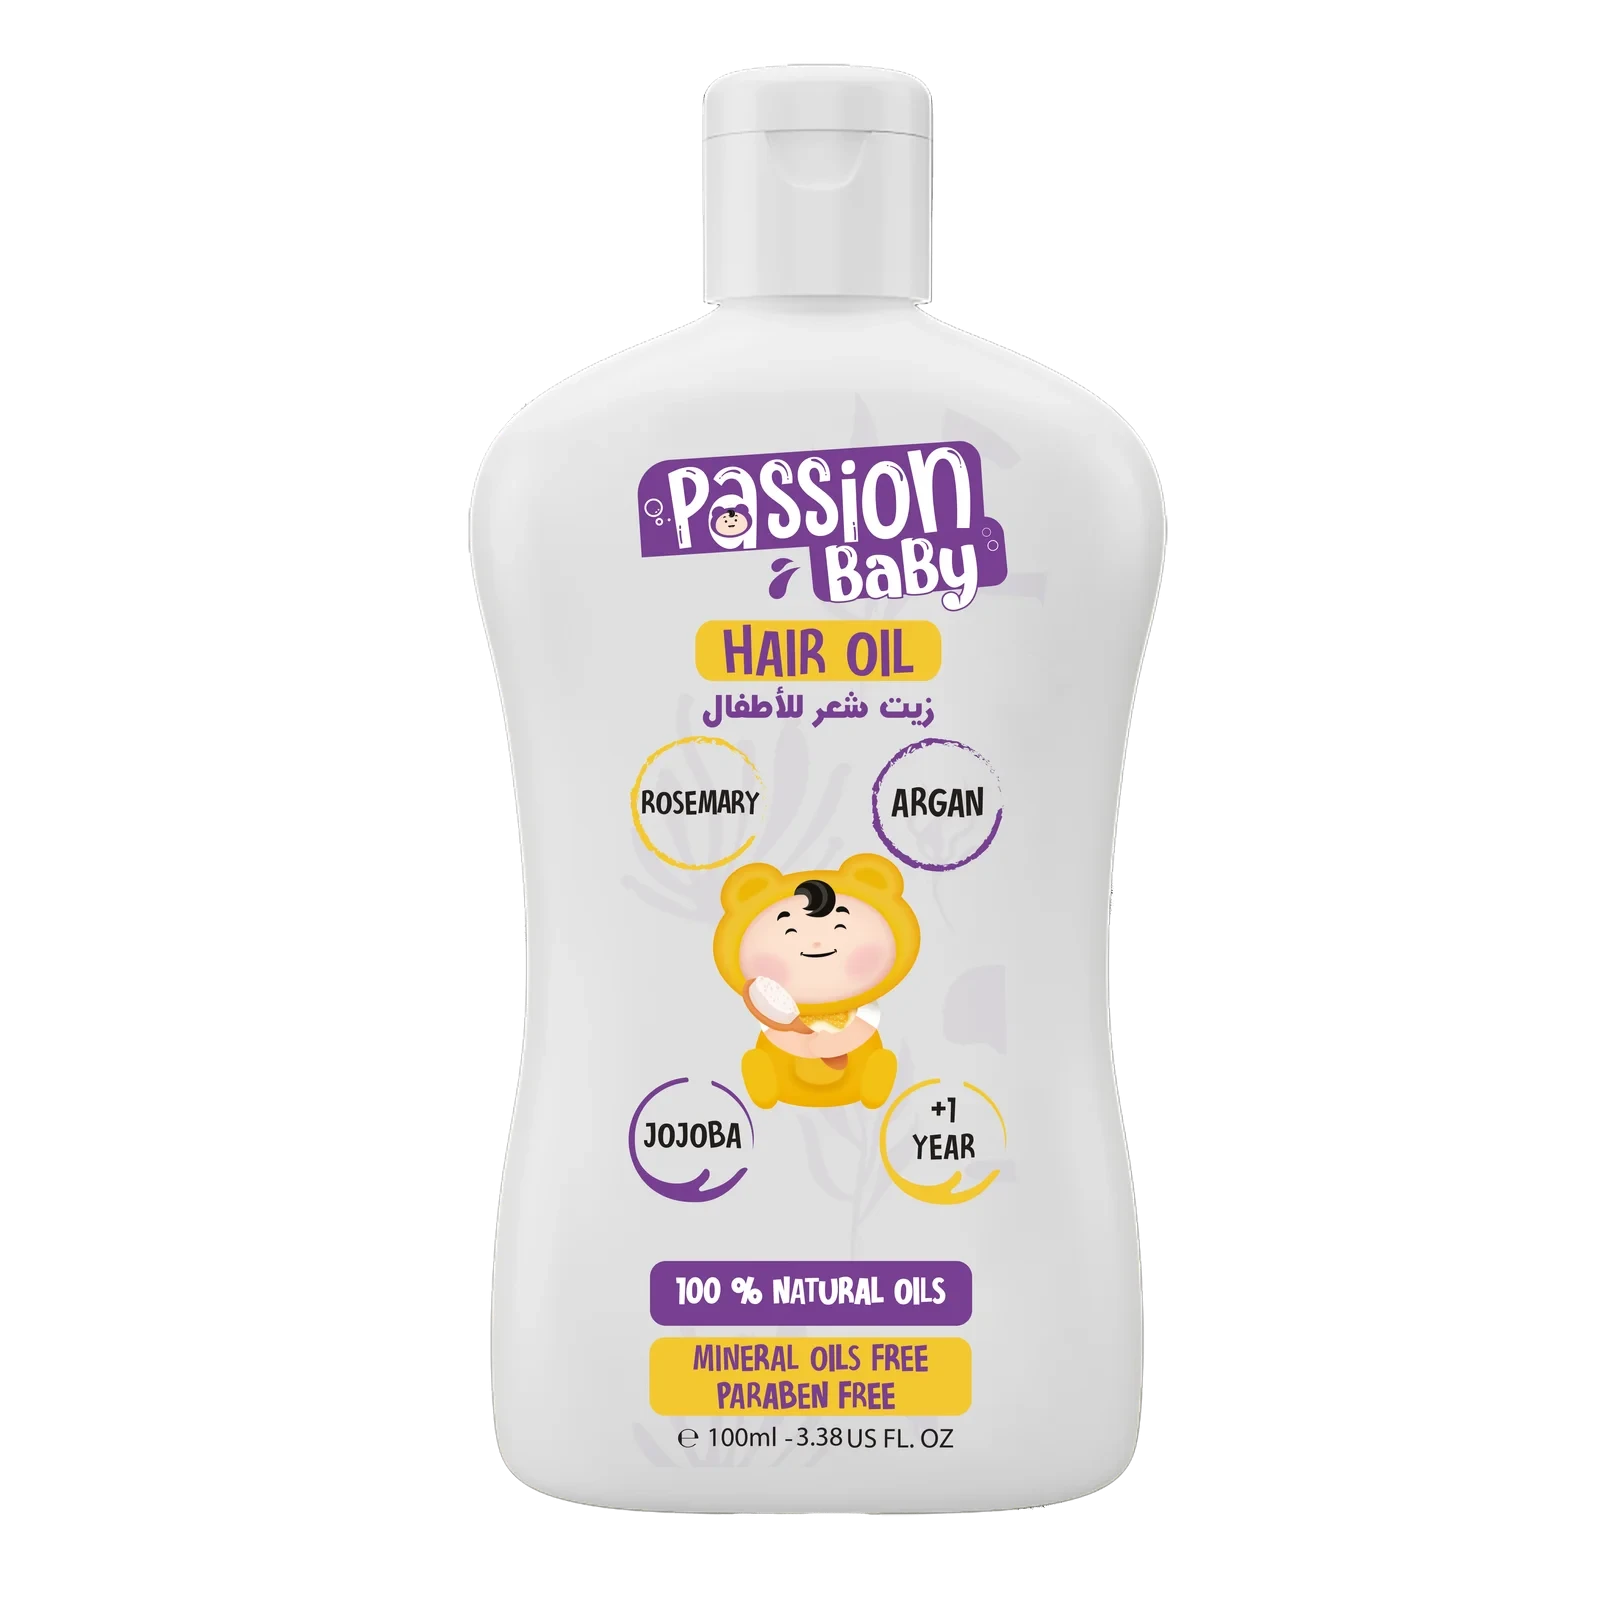 Passion Baby hair oil